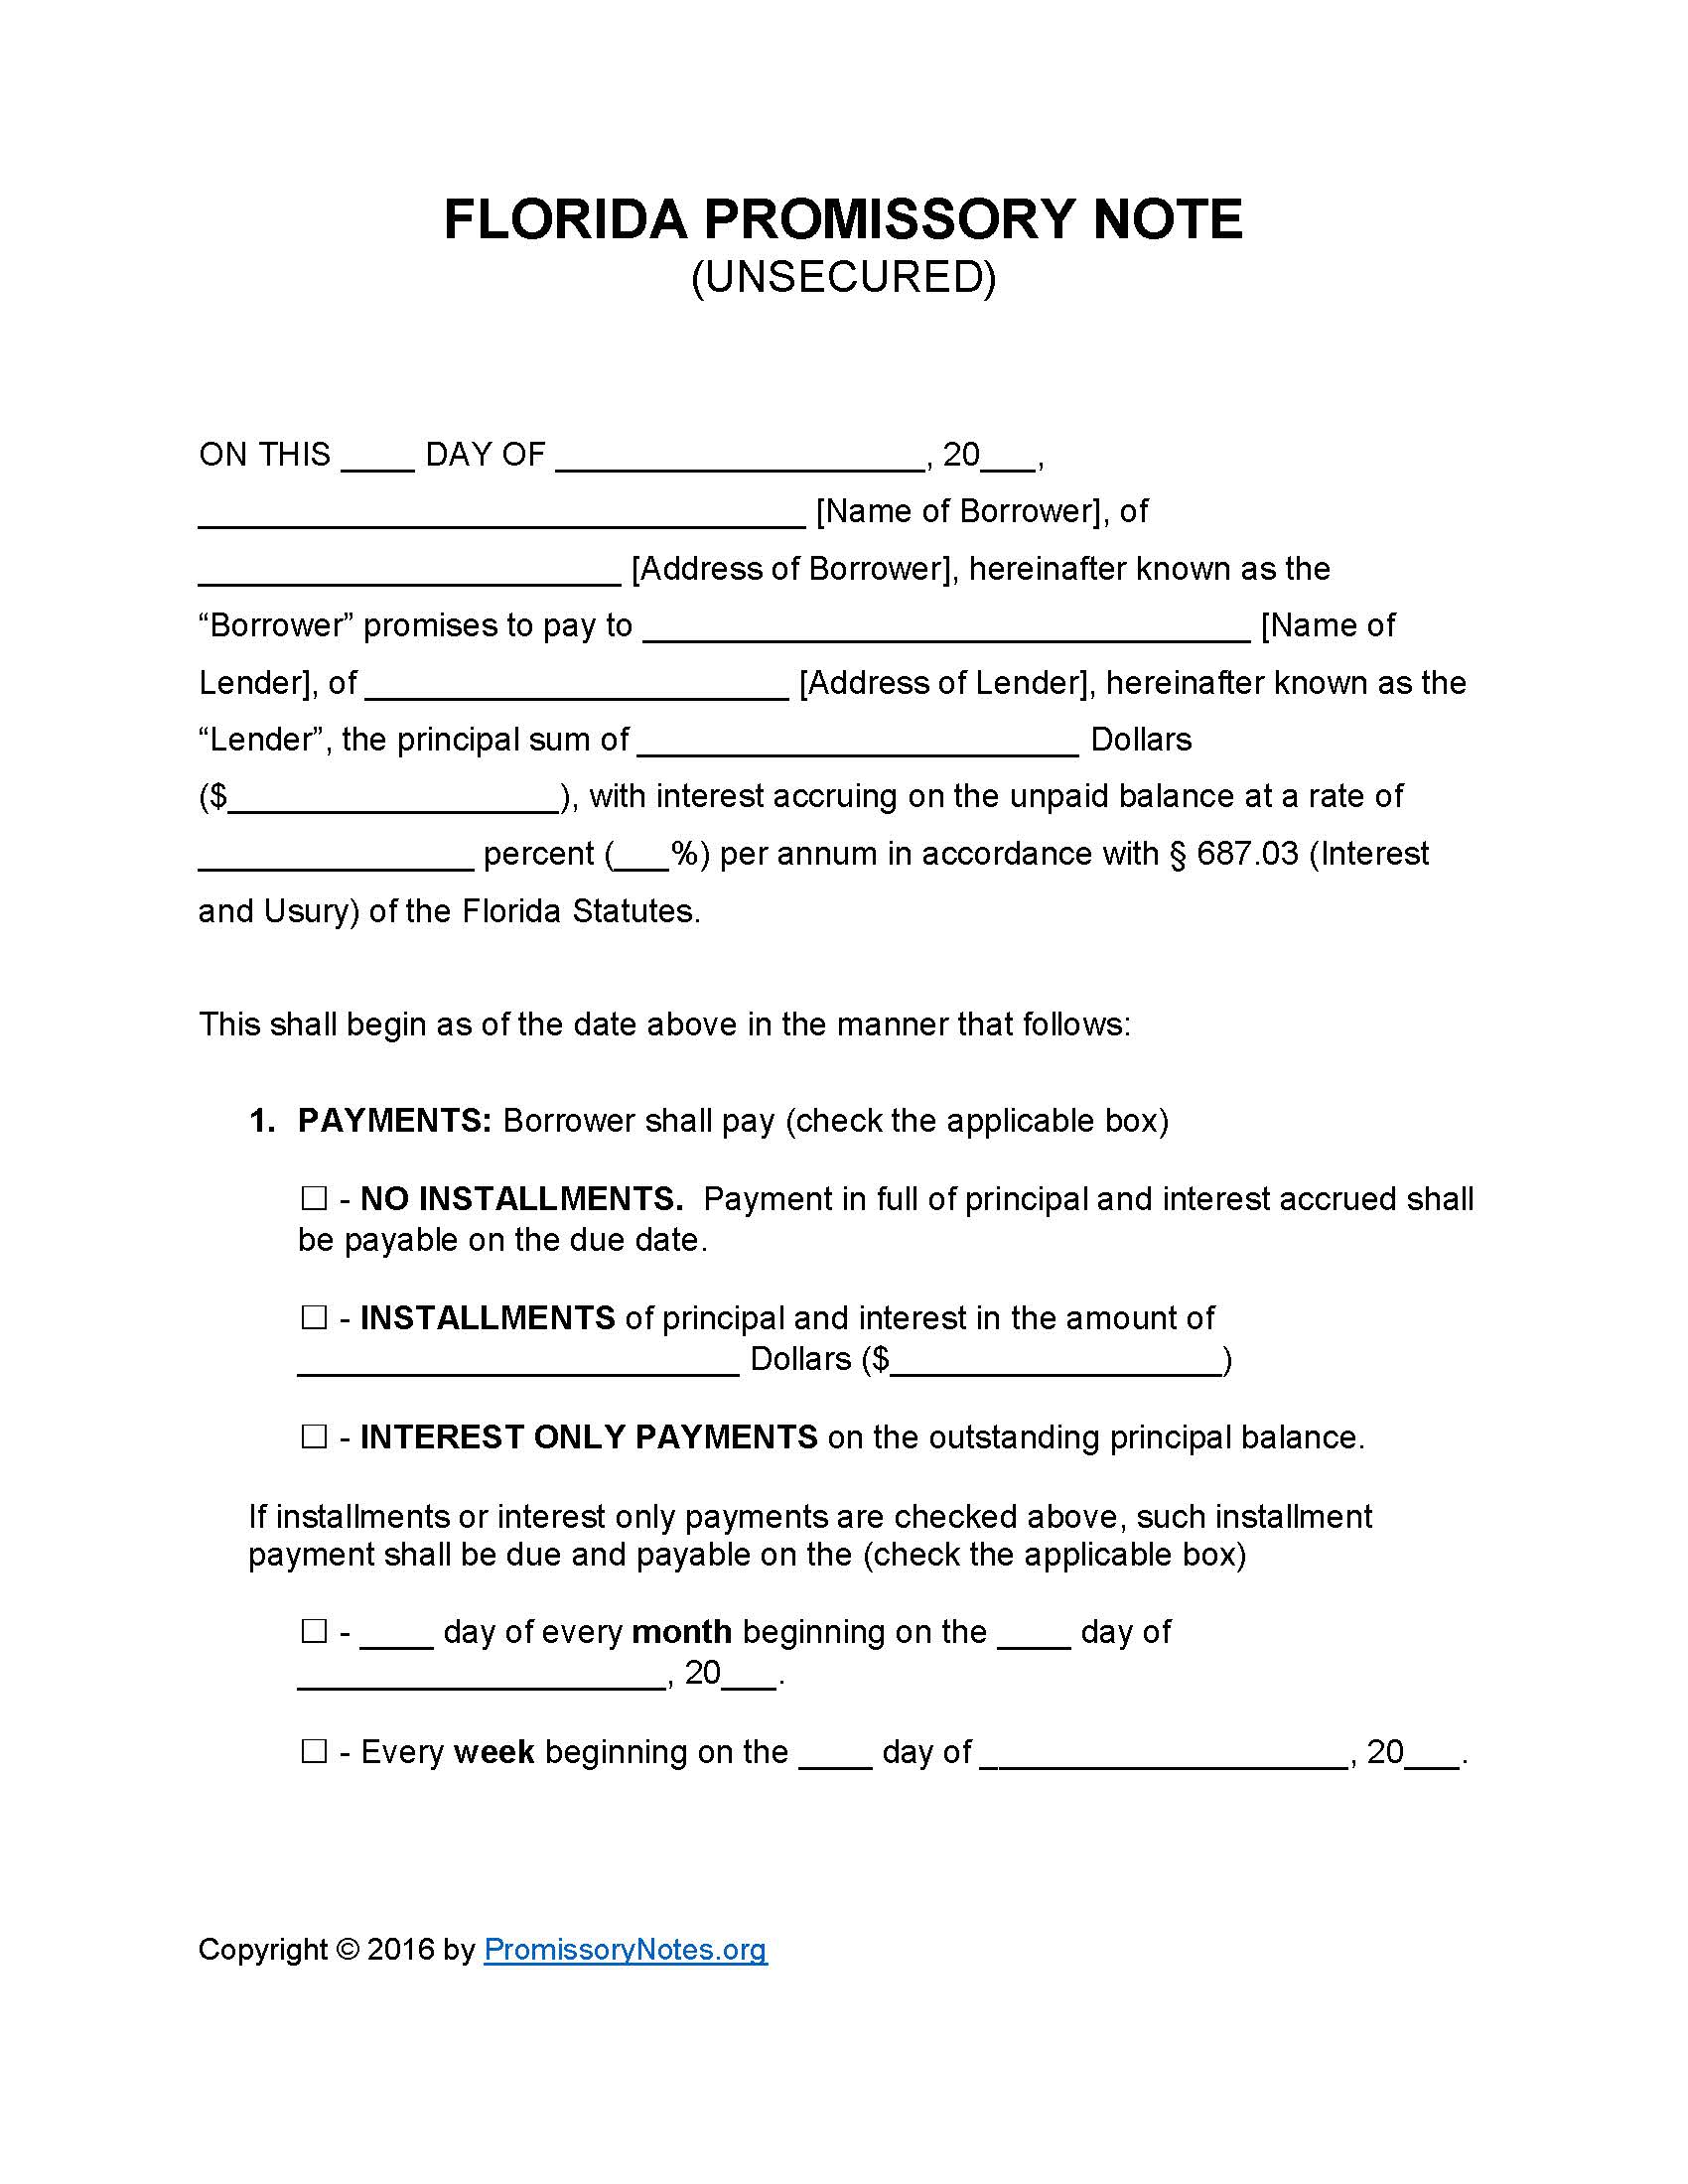 Florida Unsecured Promissory Note Template - Promissory Notes Inside Blank Loan Agreement Template